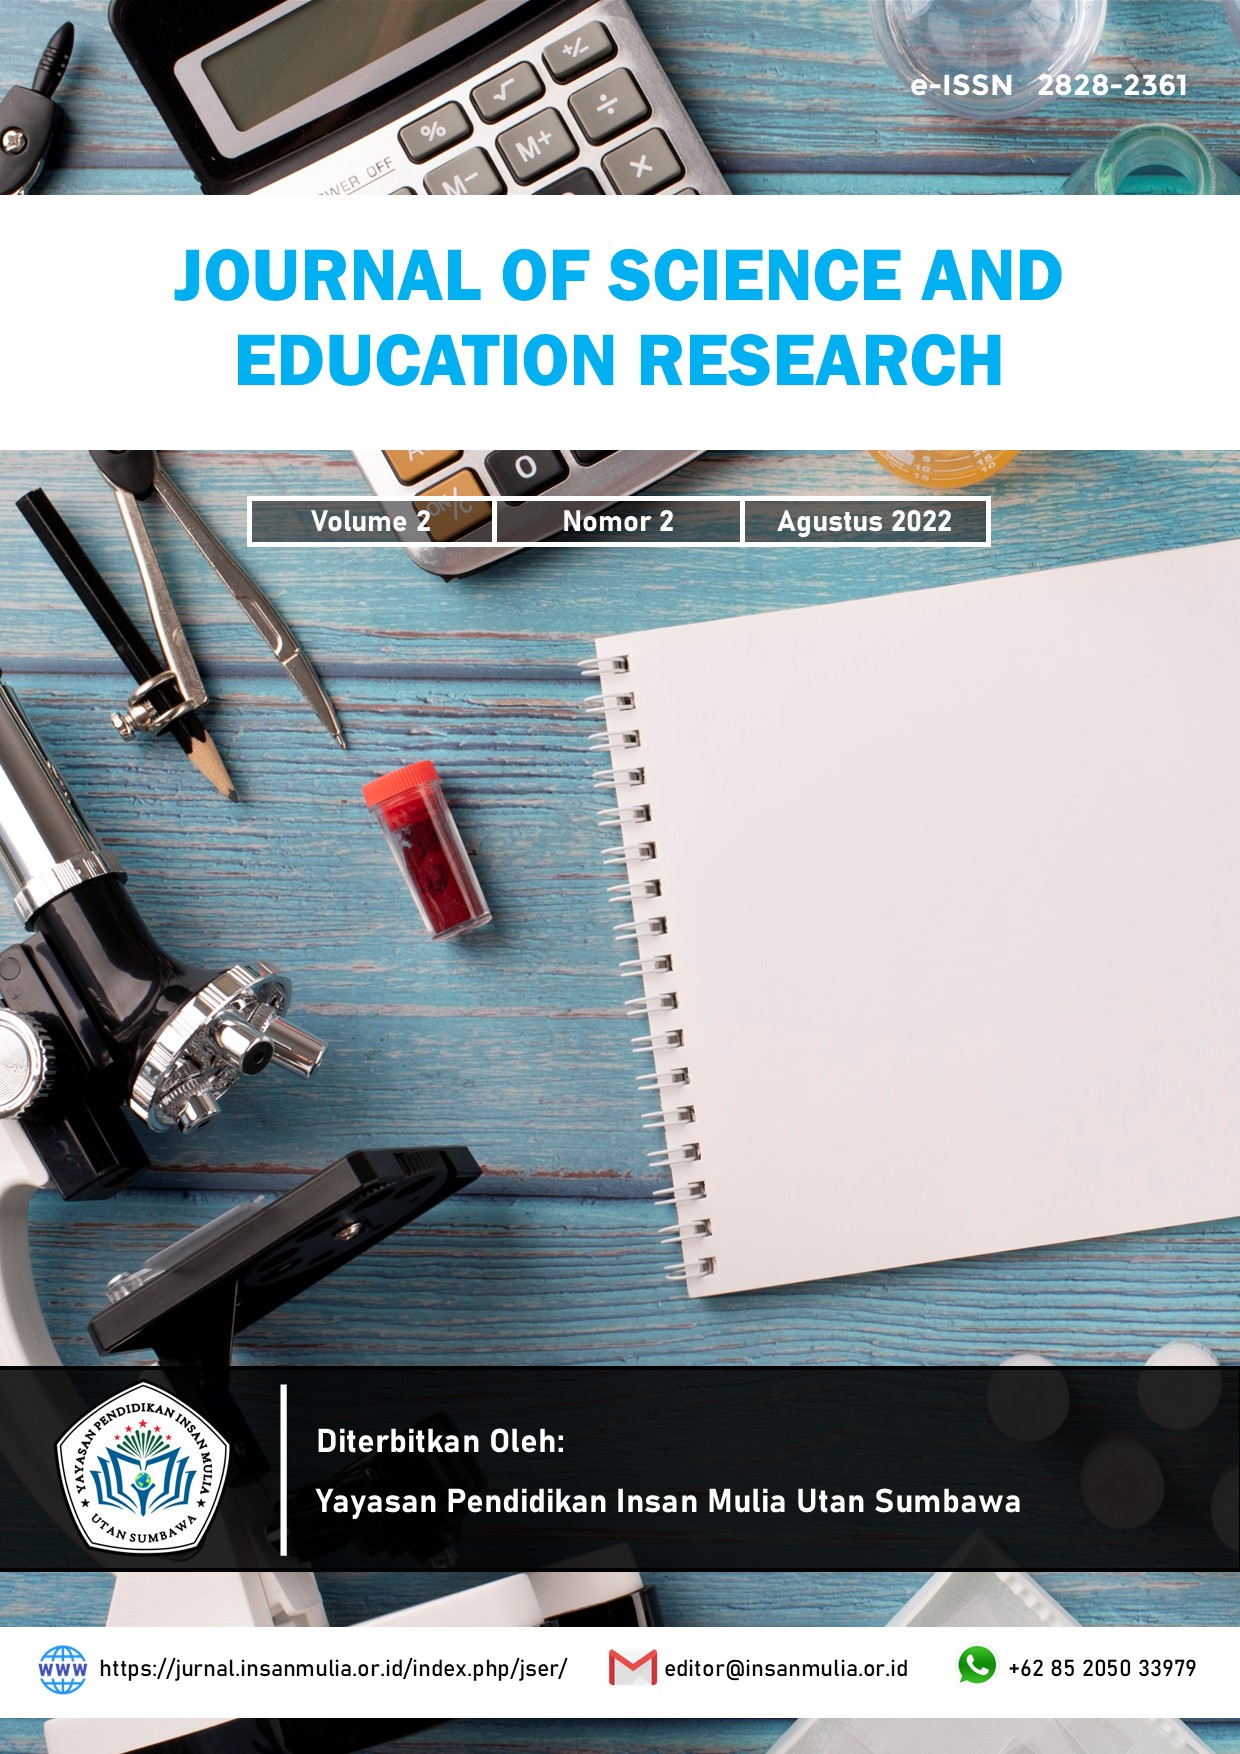 					View Vol. 2022 No. 2 (2): Journal of Science and Education Research
				